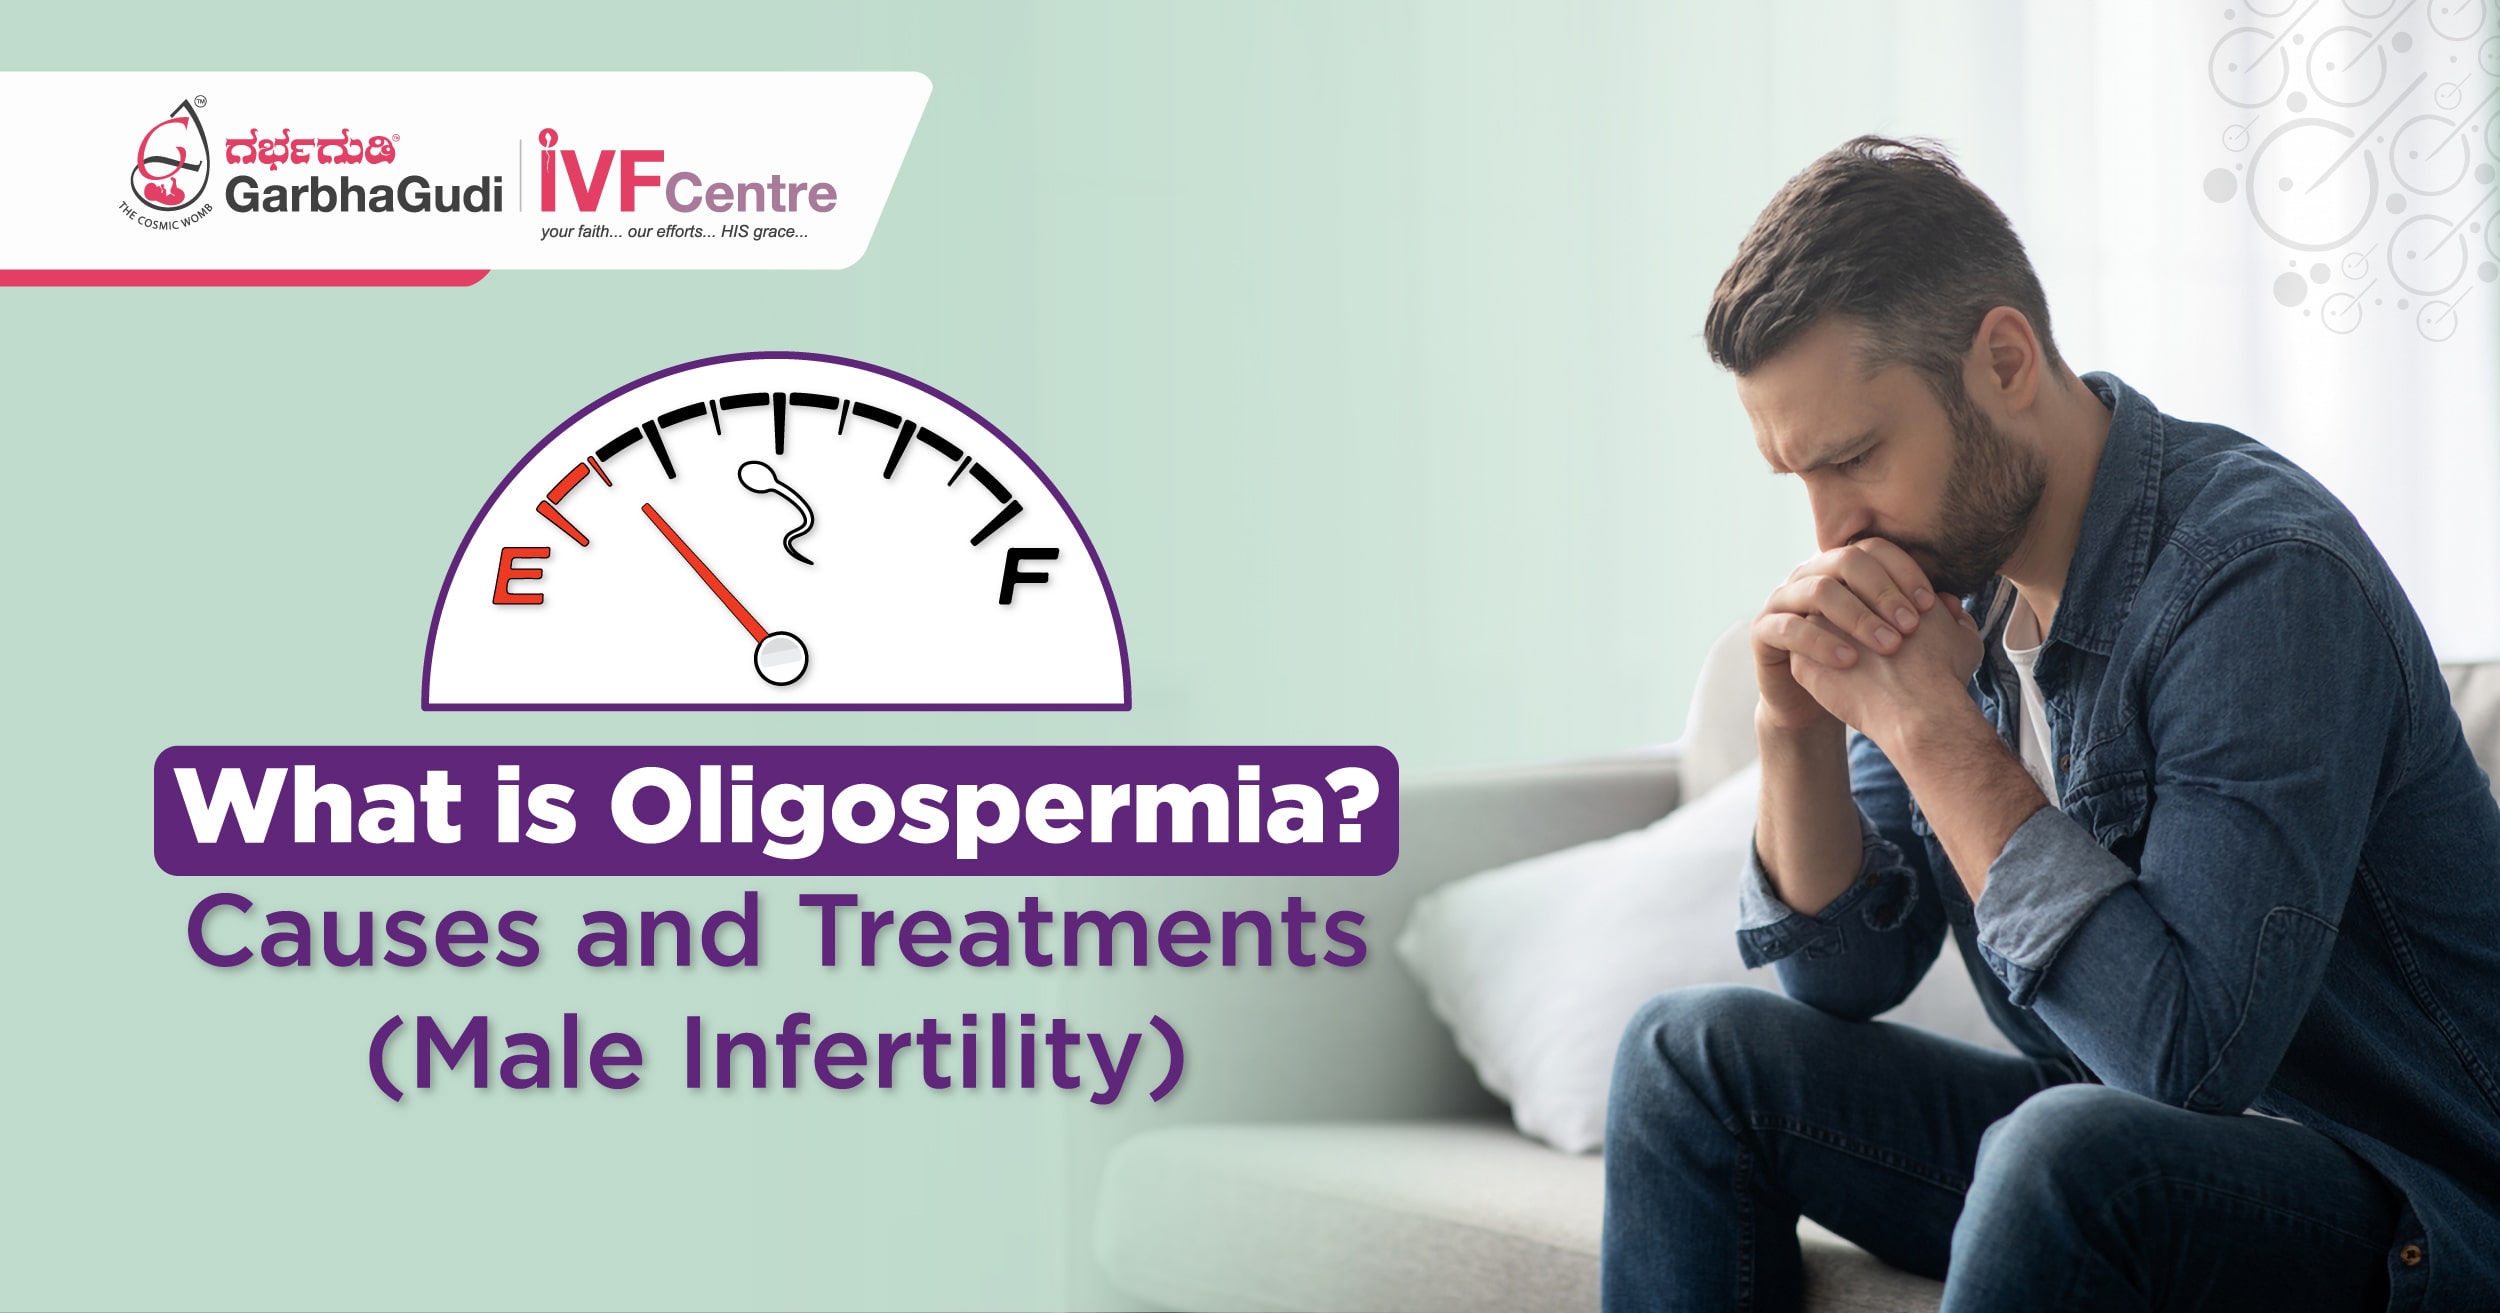 What is oligospermia? Causes and Treatments 